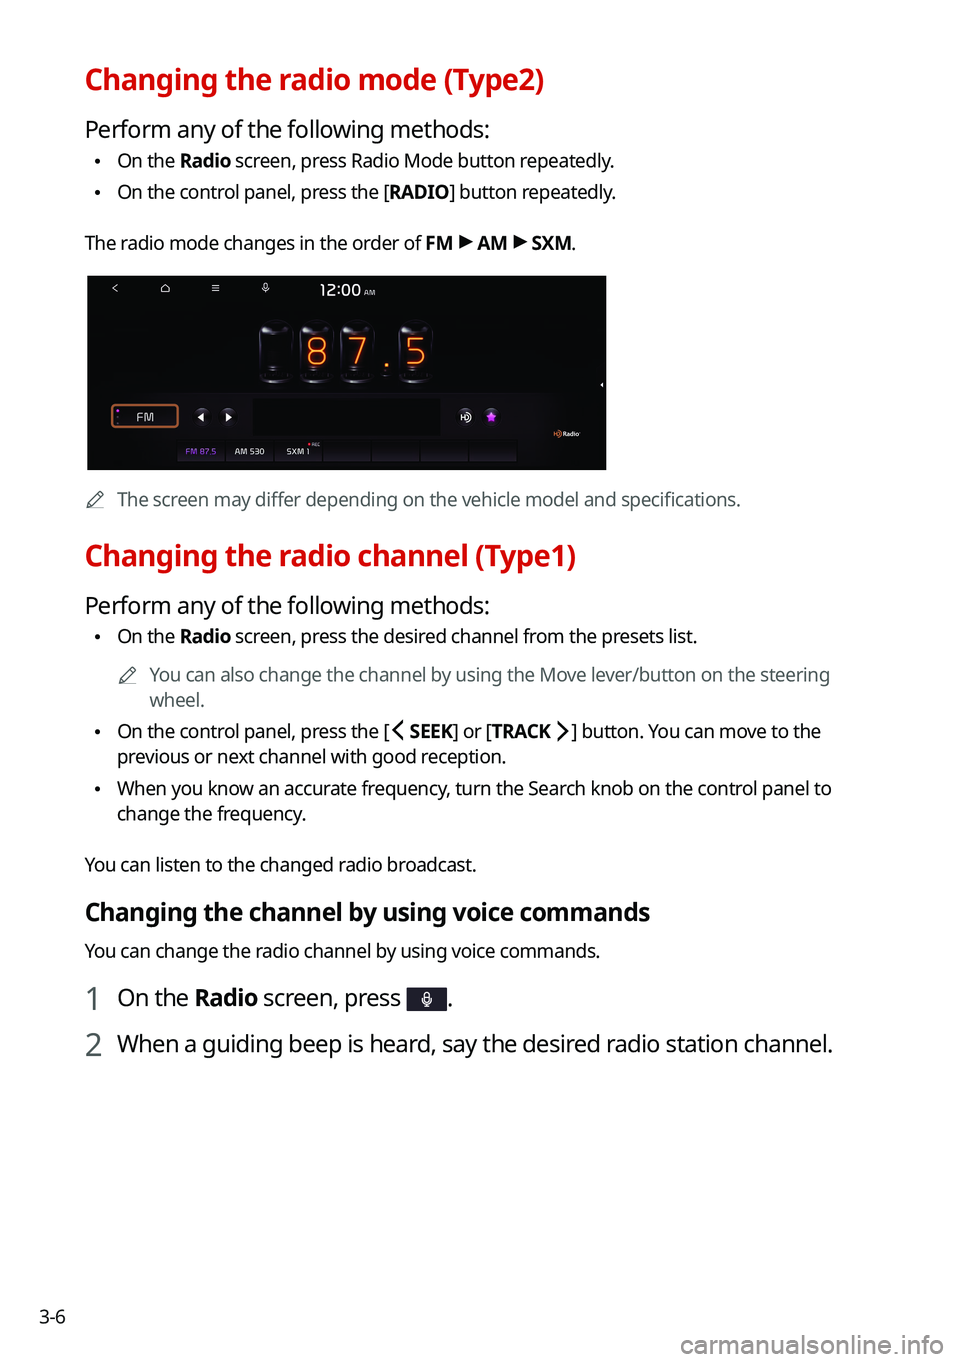 KIA SOUL 2022  Navigation System Quick Reference Guide 3-6
Changing the radio mode (Type2)
Perform any of the following methods:
 \225On the Radio screen, press Radio Mode button repeatedly.
 \225On the control panel, press the [
RADIO] button repeatedly.